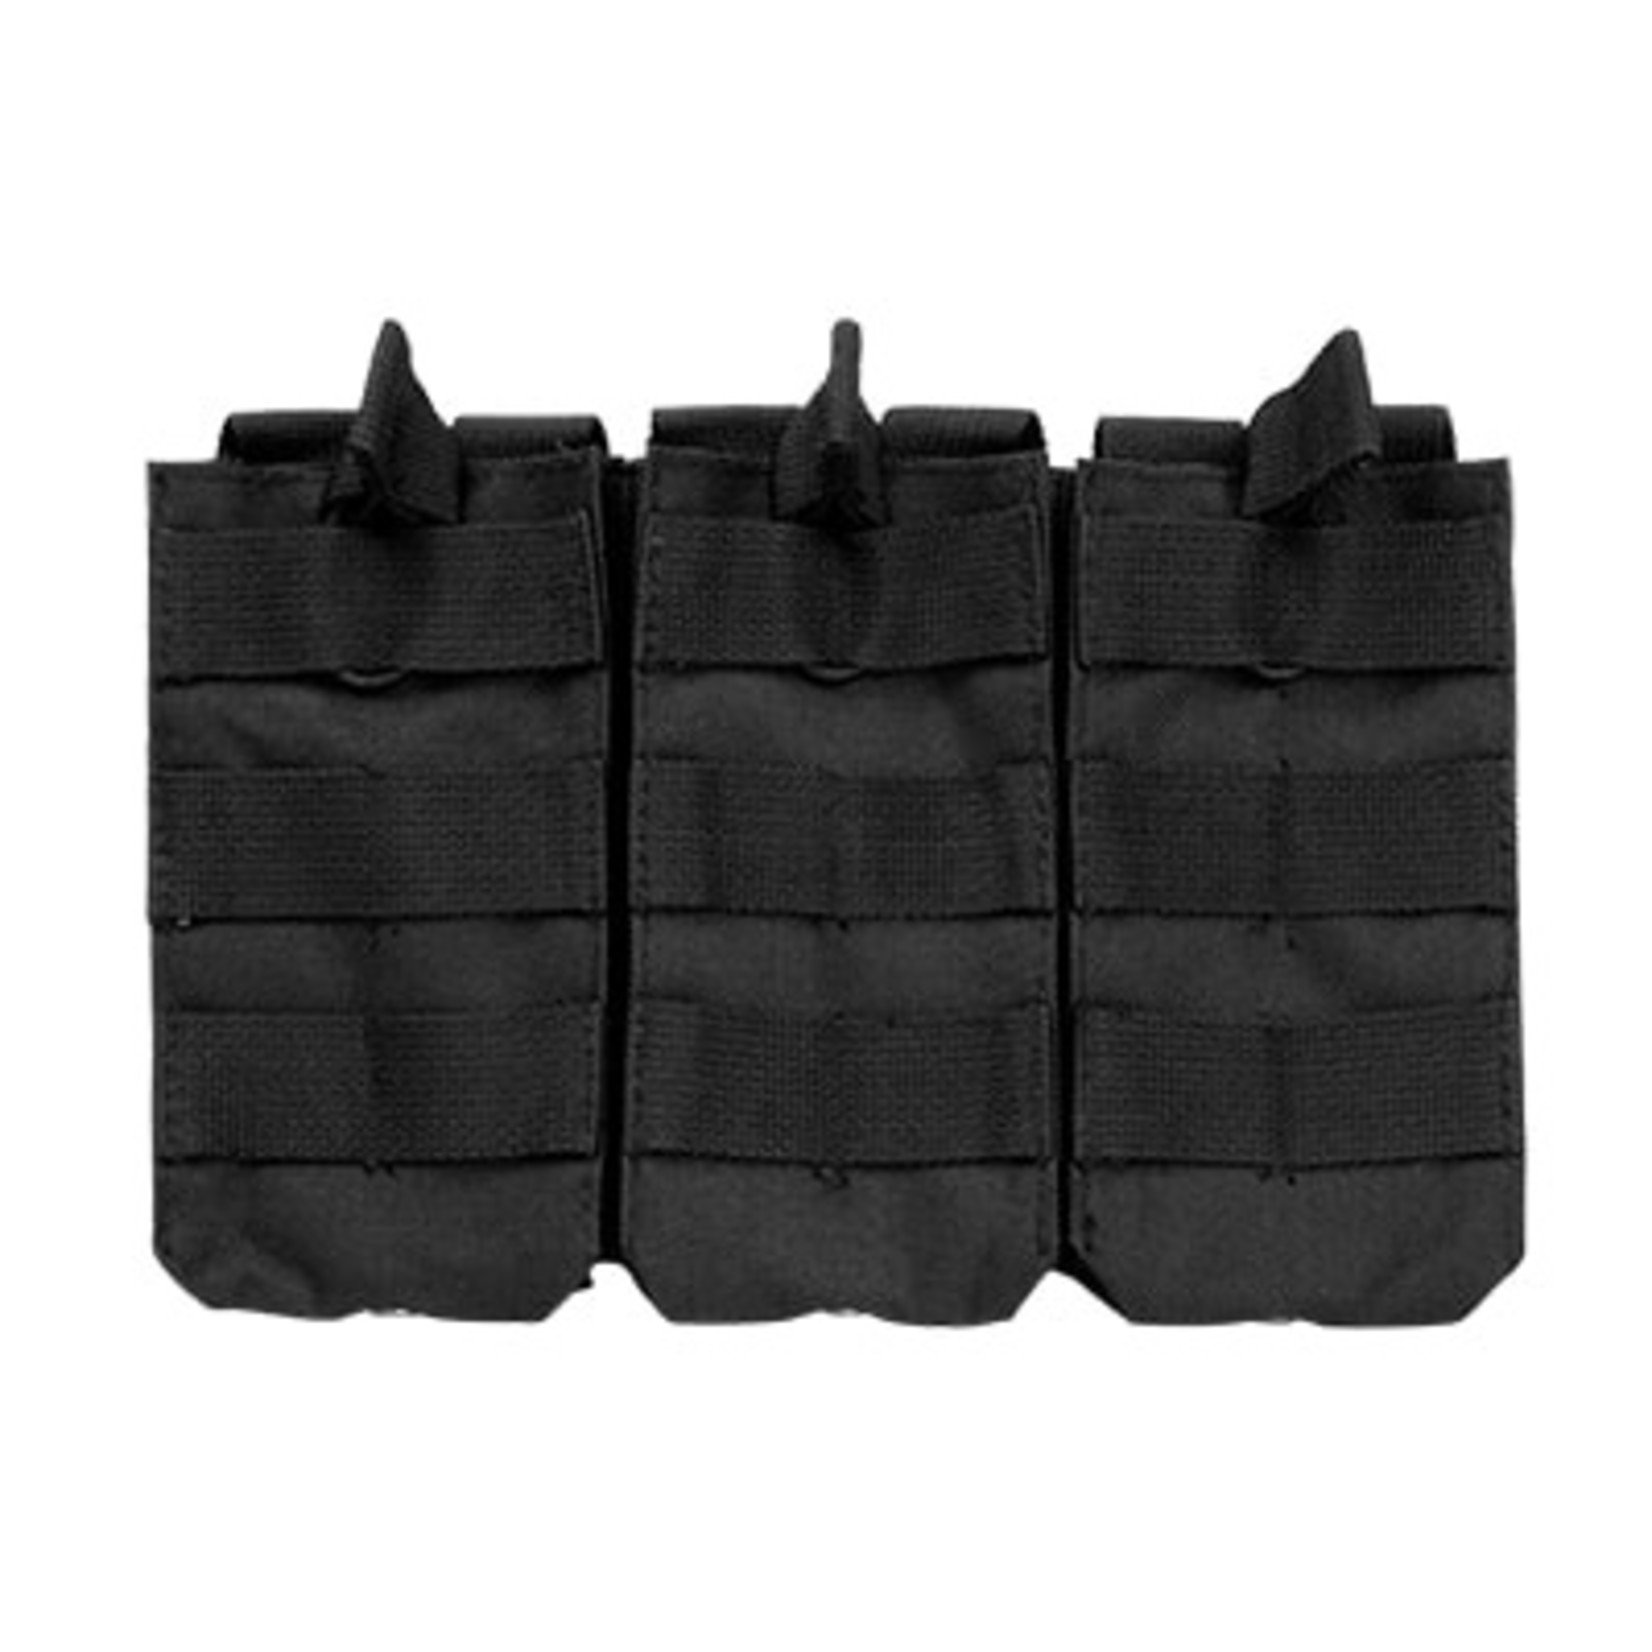 VISM by NcStar AR Single Mag Pouch 